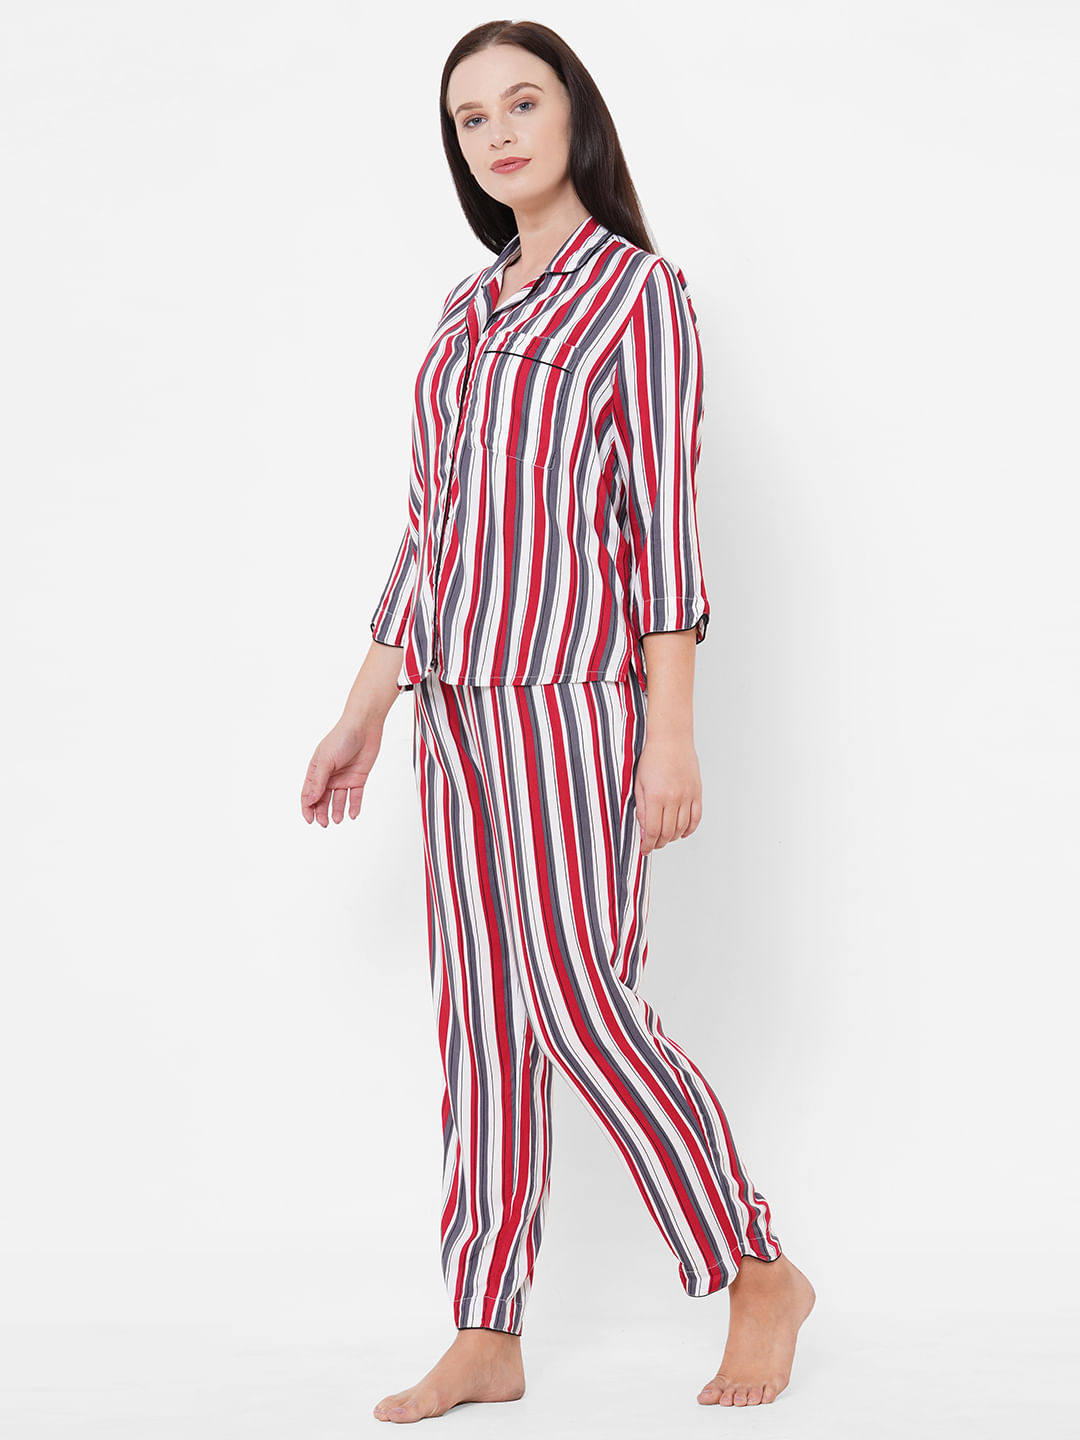 Our Classic Striped Pyjama Set is timeless and the perfect way to lull  yourself into dreamland